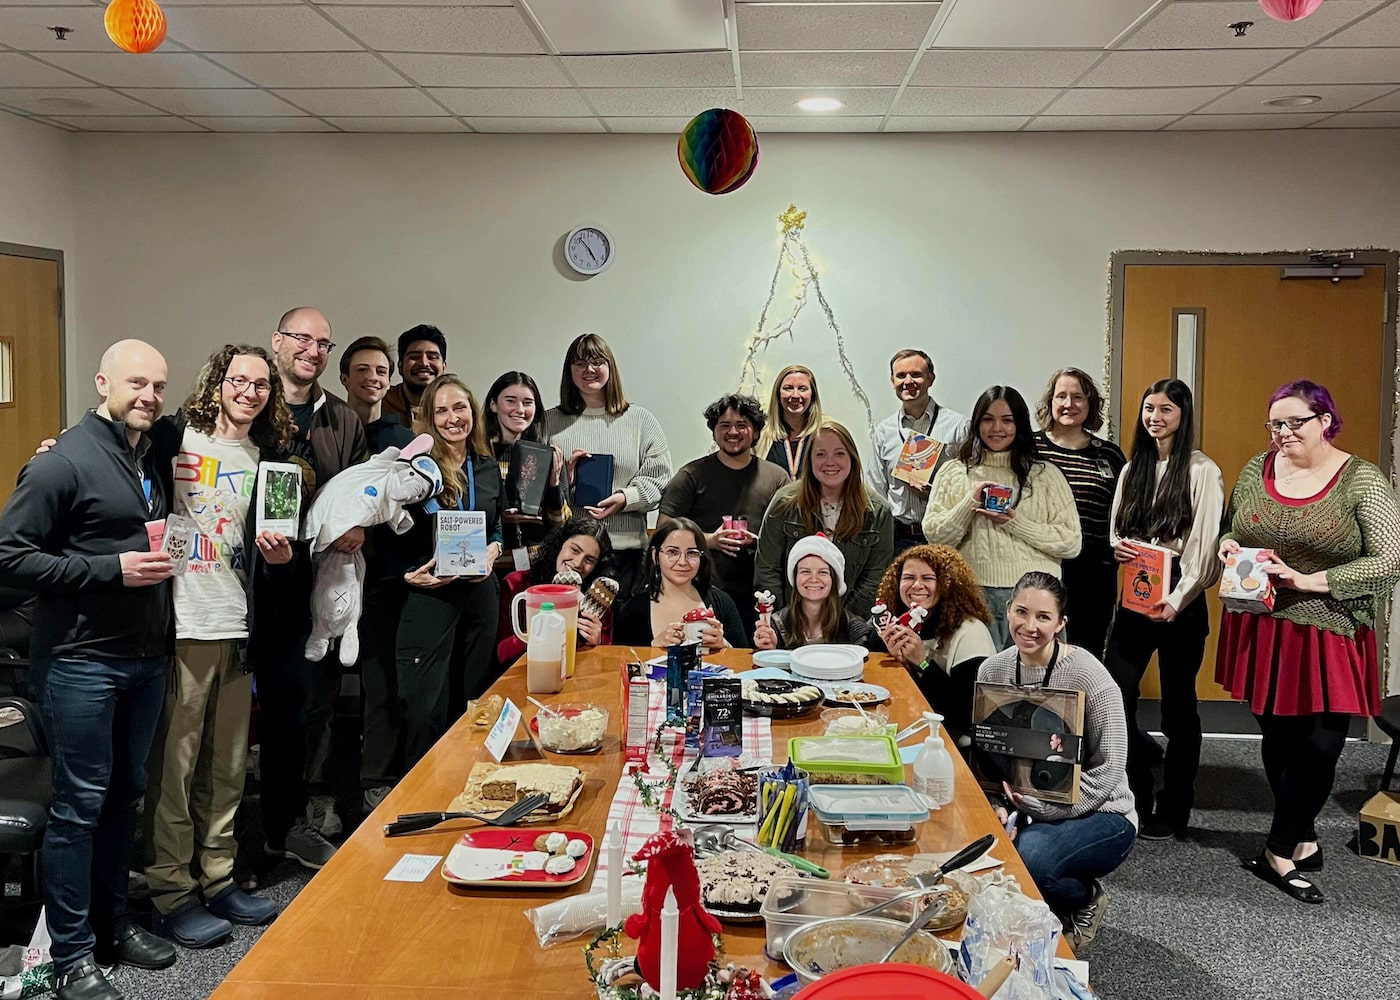 SHARP lab members smiling holding gifts from a holiday gift swap game